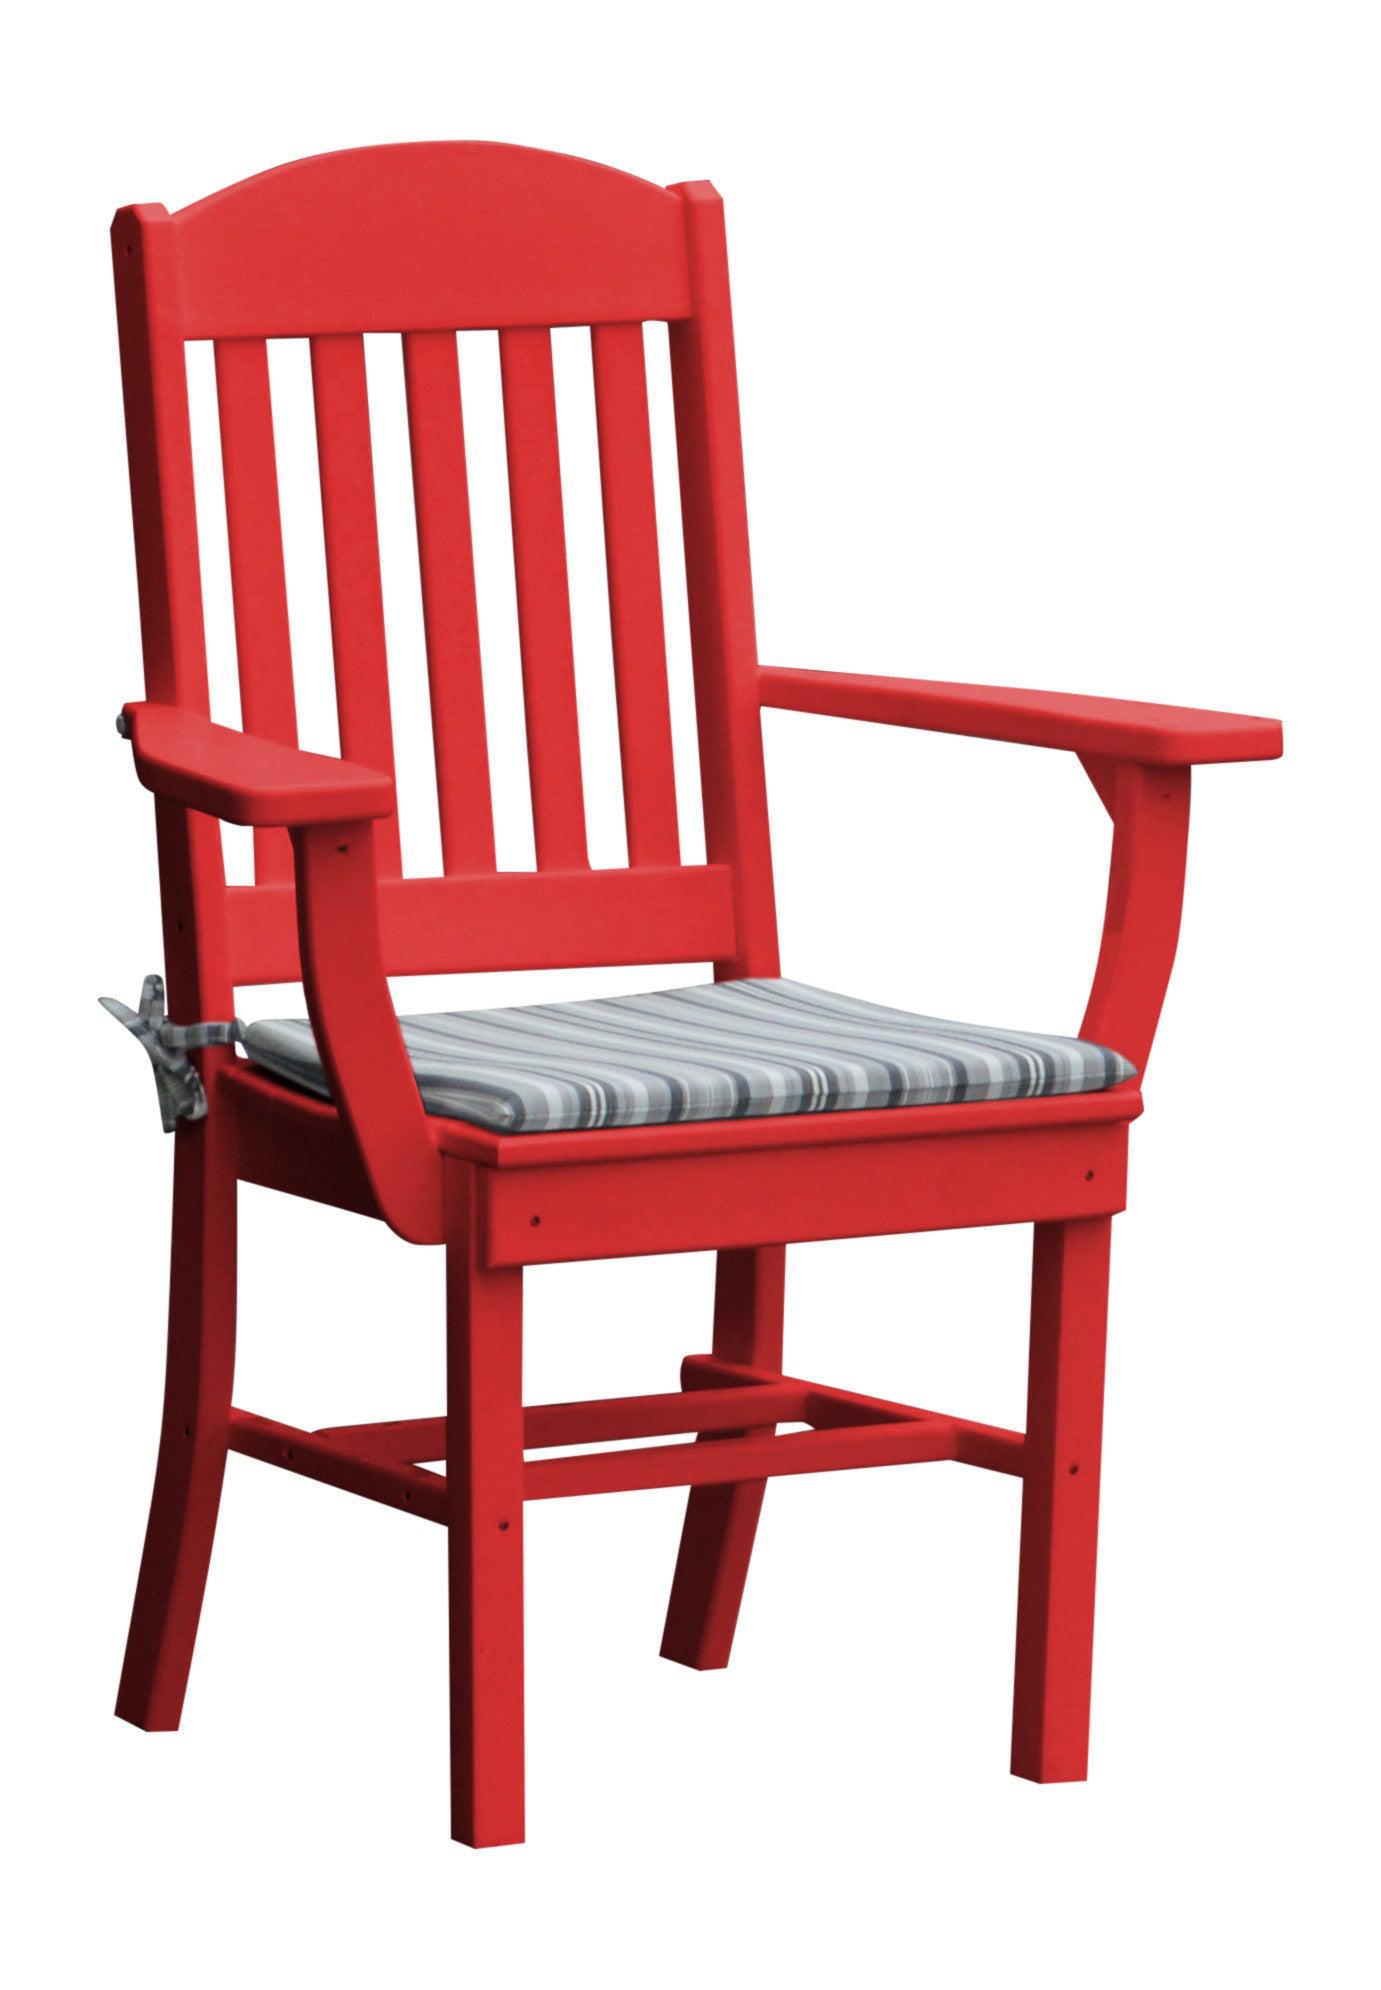 A&L Furniture Company Recycled Plastic Classic Dining Chair w/ Arms - Bright Red